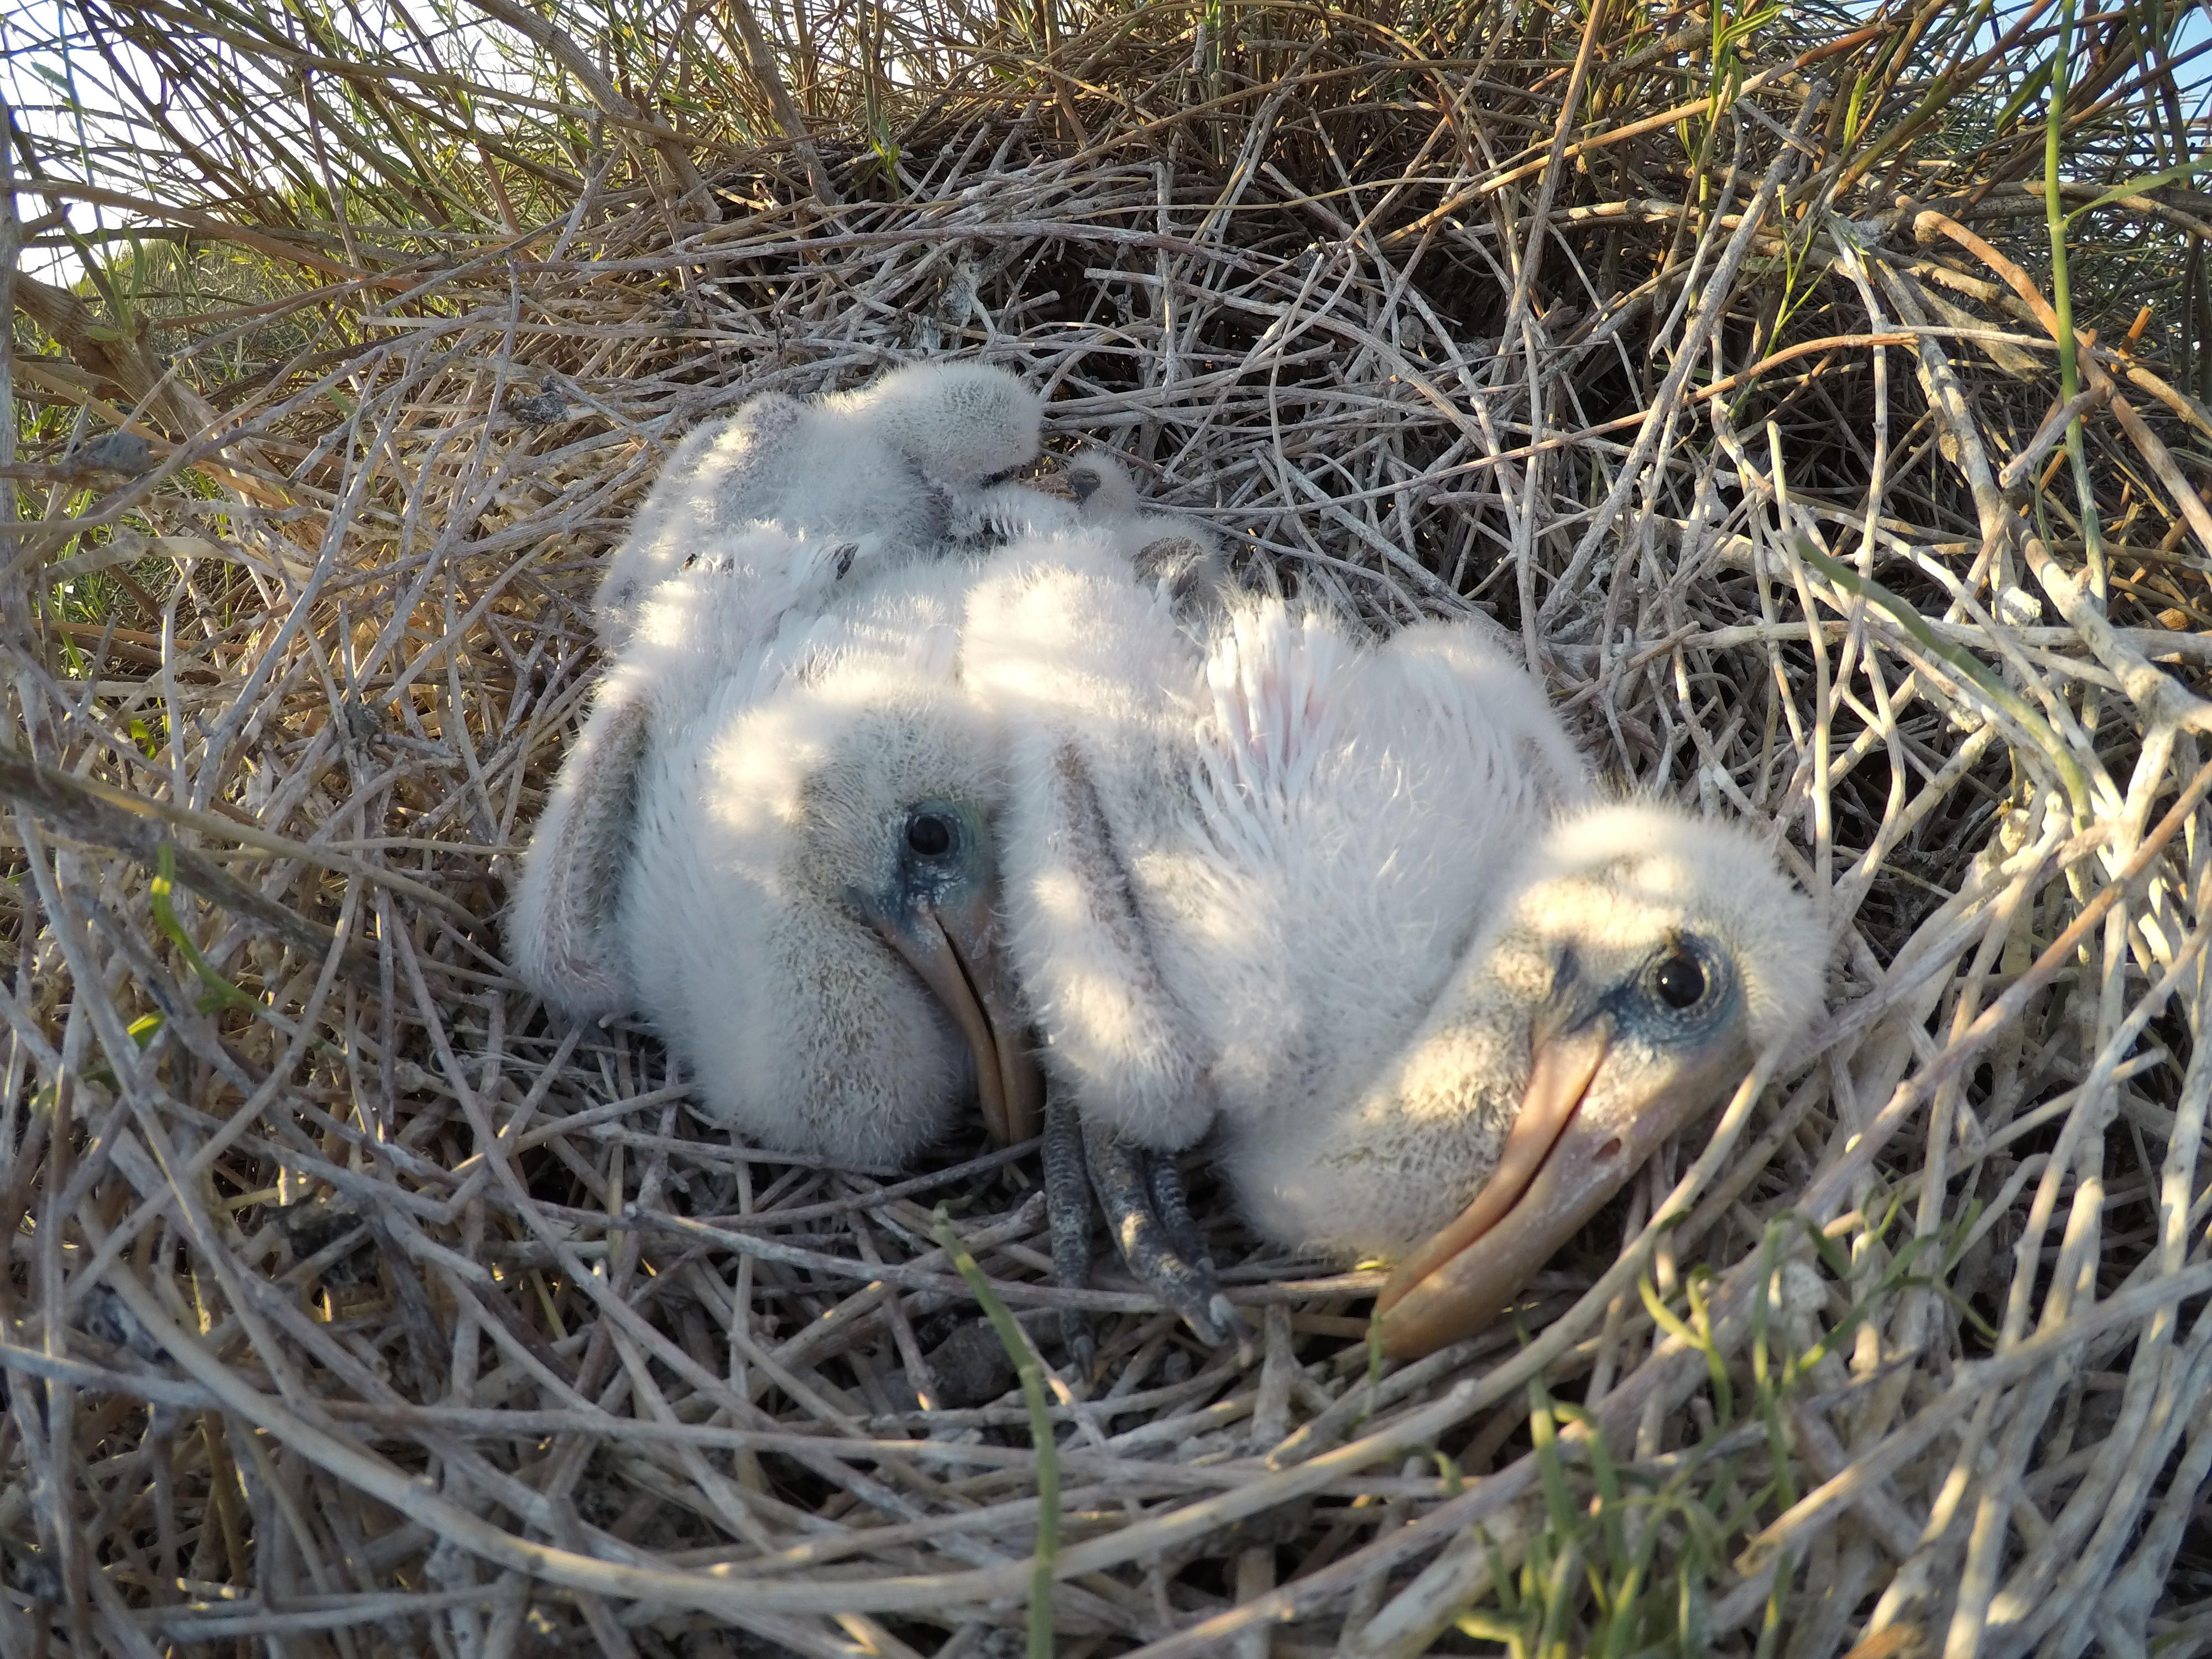 A few very young spoonbill chicks in a nest.